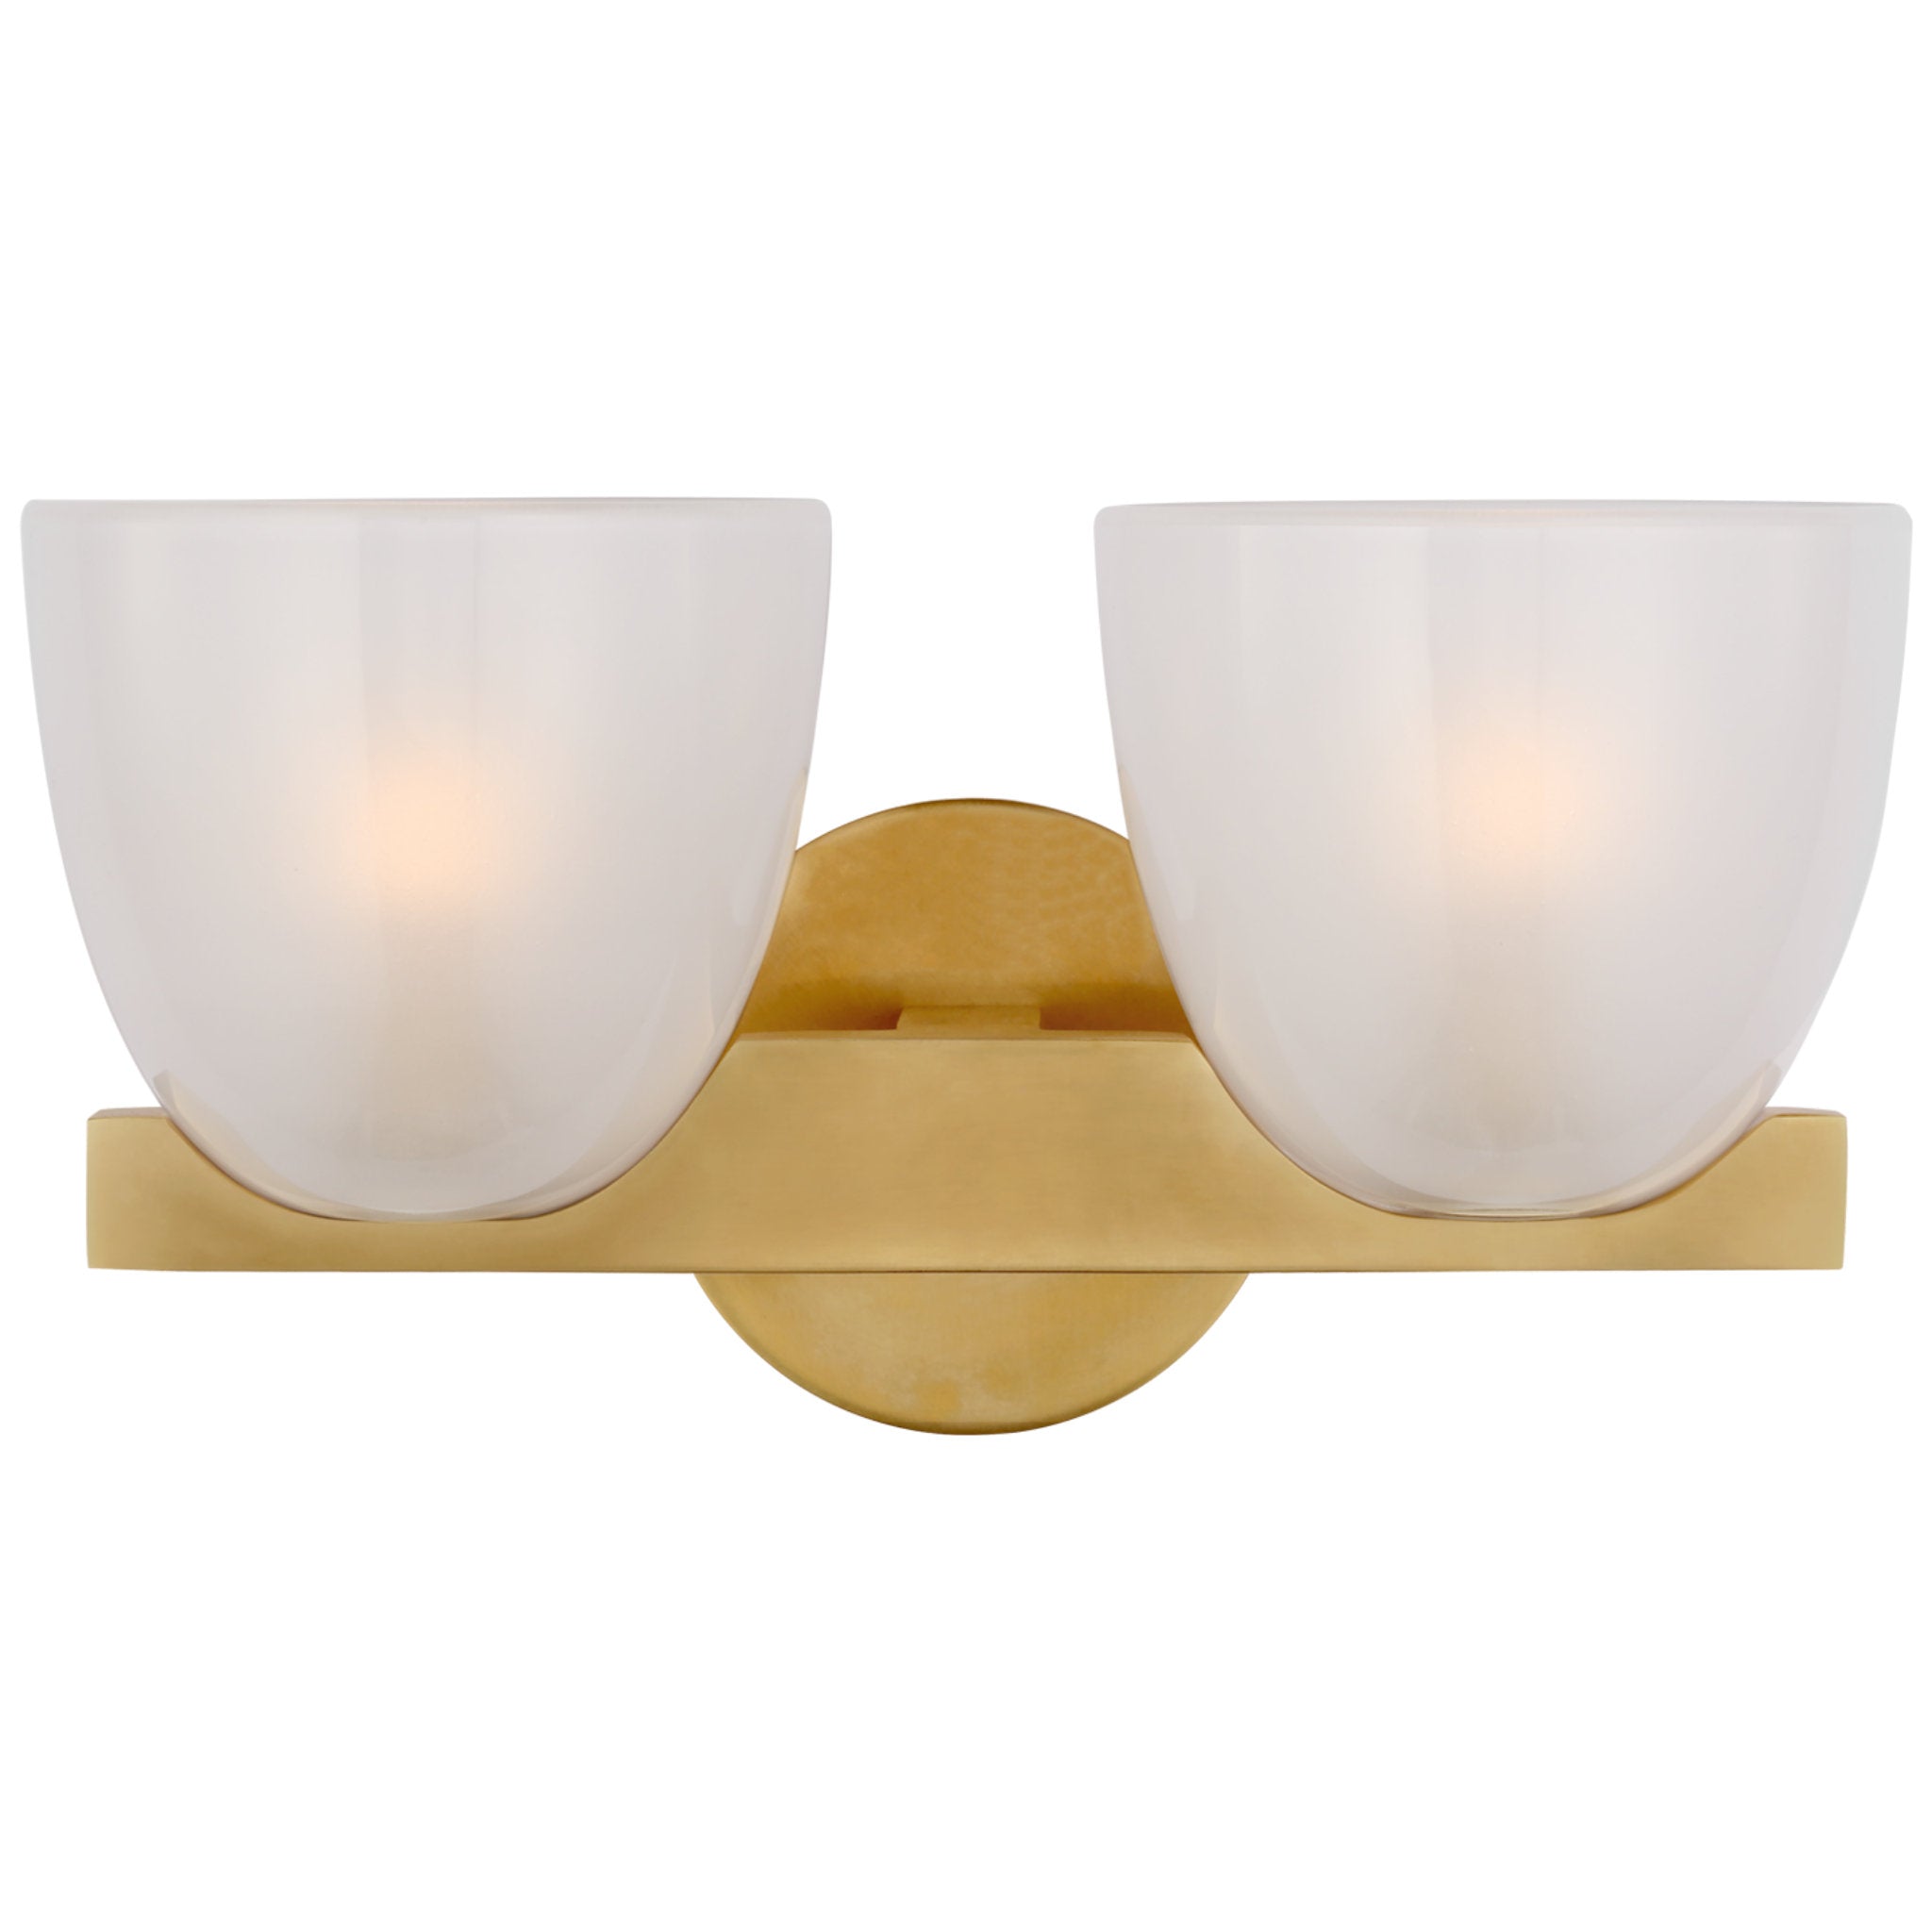 AERIN Carola Double Sconce in Hand-Rubbed Antique Brass with Frosted Glass